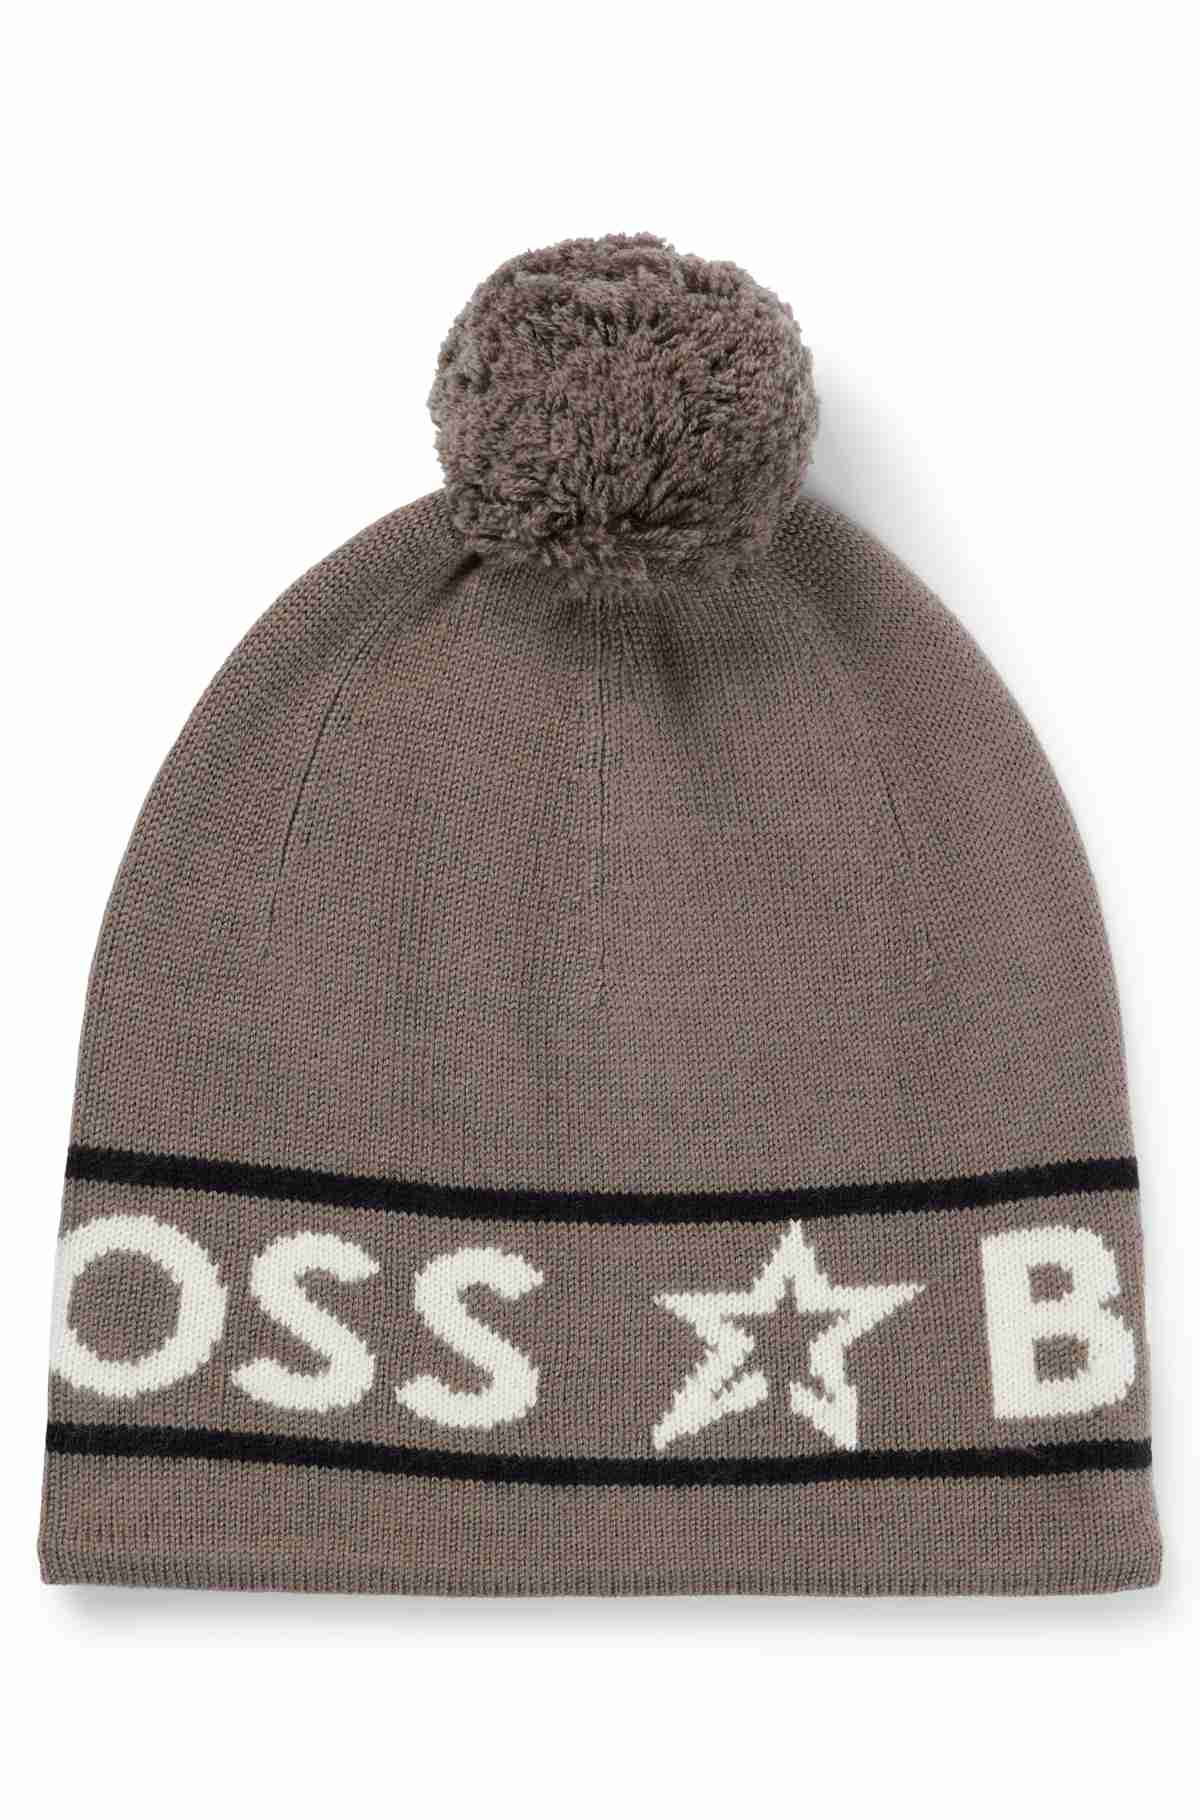 BOSS Returns To The Slopes With The Launch Of BOSS X Perfect Moment Capsule